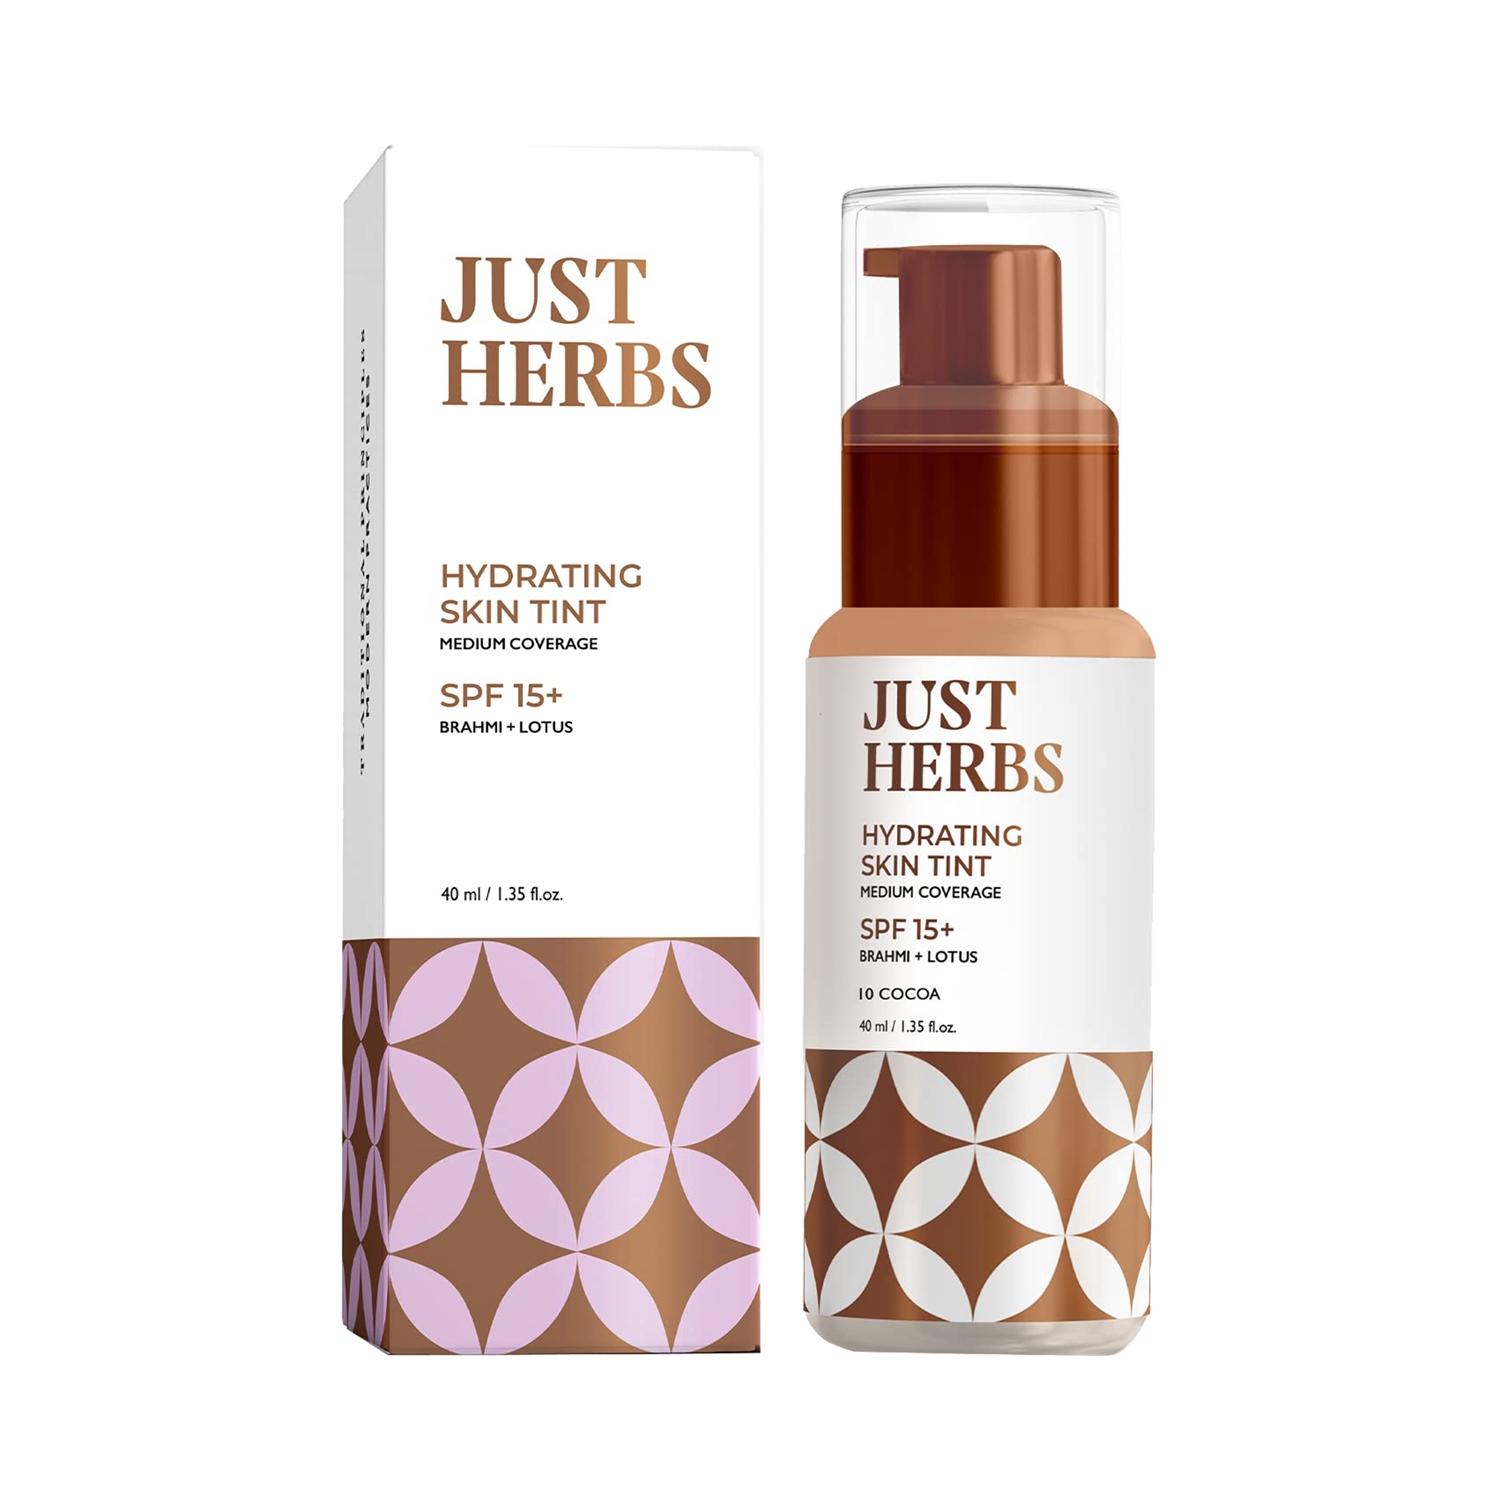 Just Herbs | Just Herbs Hydrating Skin Tint BB Cream Foundation - 10 Cocoa (40ml)